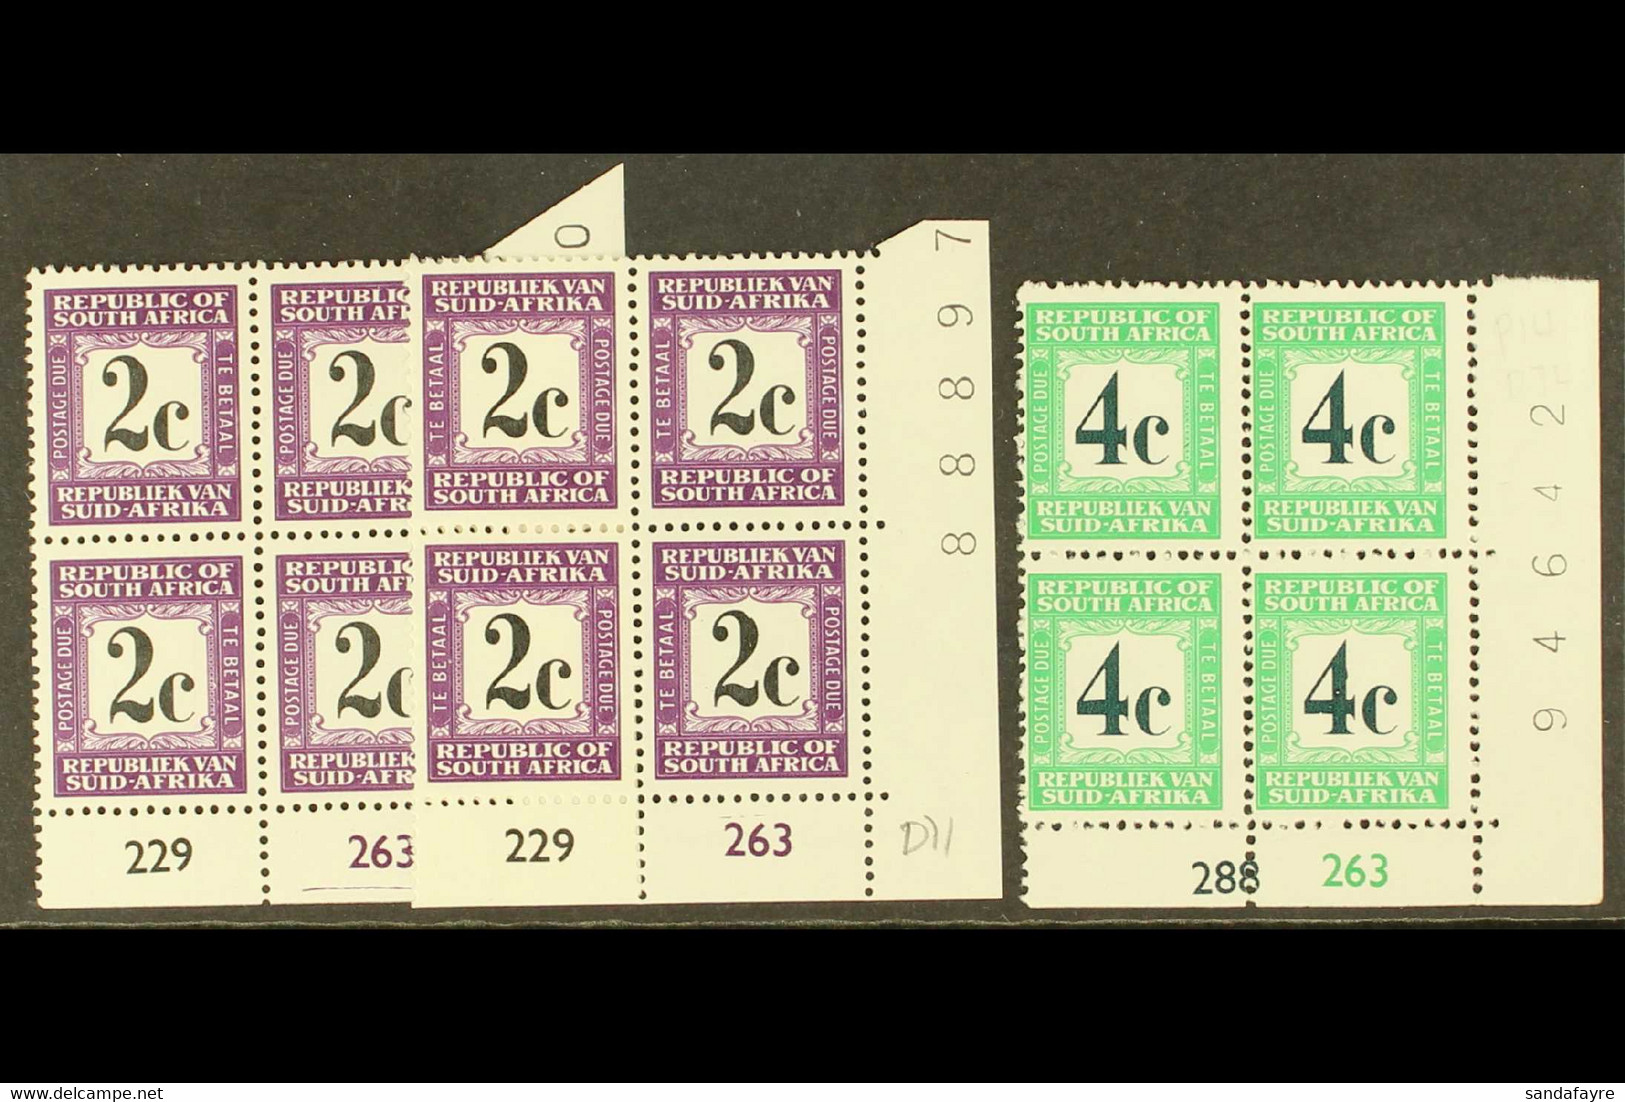 POSTAGE DUE 1971 2c Both Languages & 4c Perf.14 Issues, CYLINDER BLOCKS OF FOUR, SG D71/4, Never Hinged Mint, 4c With Fe - Unclassified